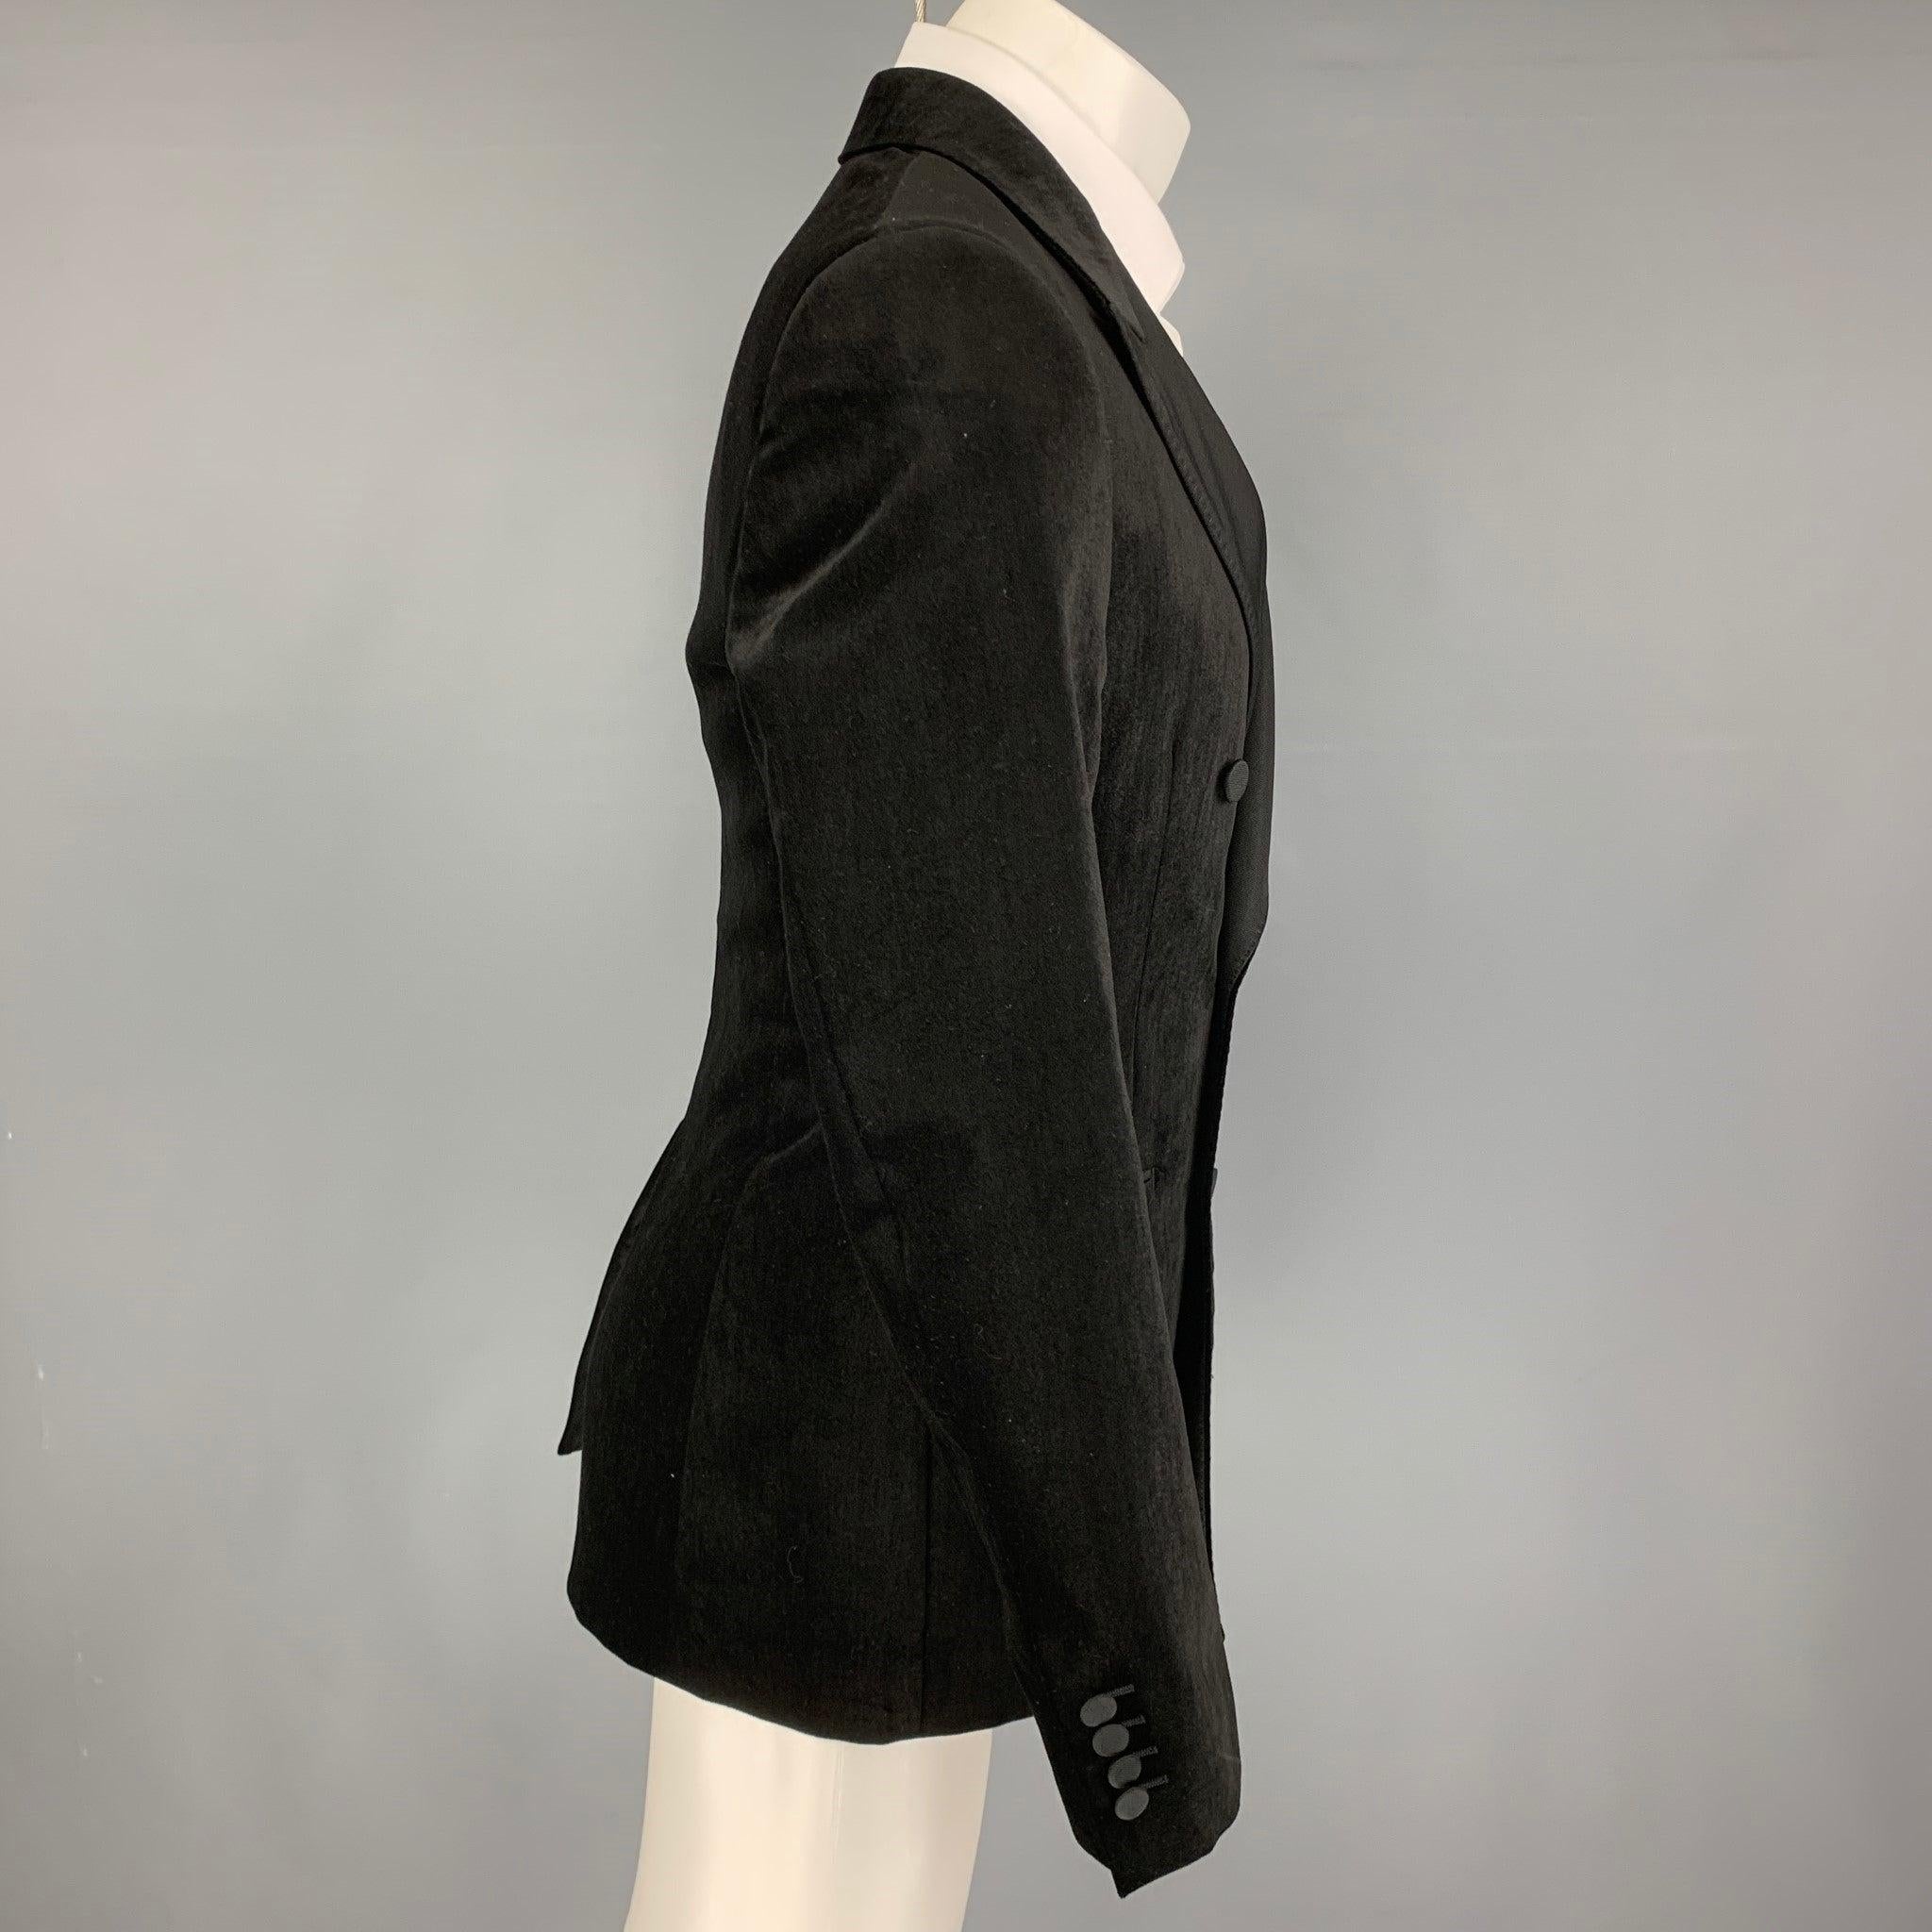 ALEXANDER McQUEEN sport coat comes in a black velvet cotton with a full liner featuring a peak lapel, single back vent, slit pockets, anda double breasted closure. Made in Italy.
New with tags.
 

Marked:   48 

Measurements: 
 
Shoulder: 17 inches